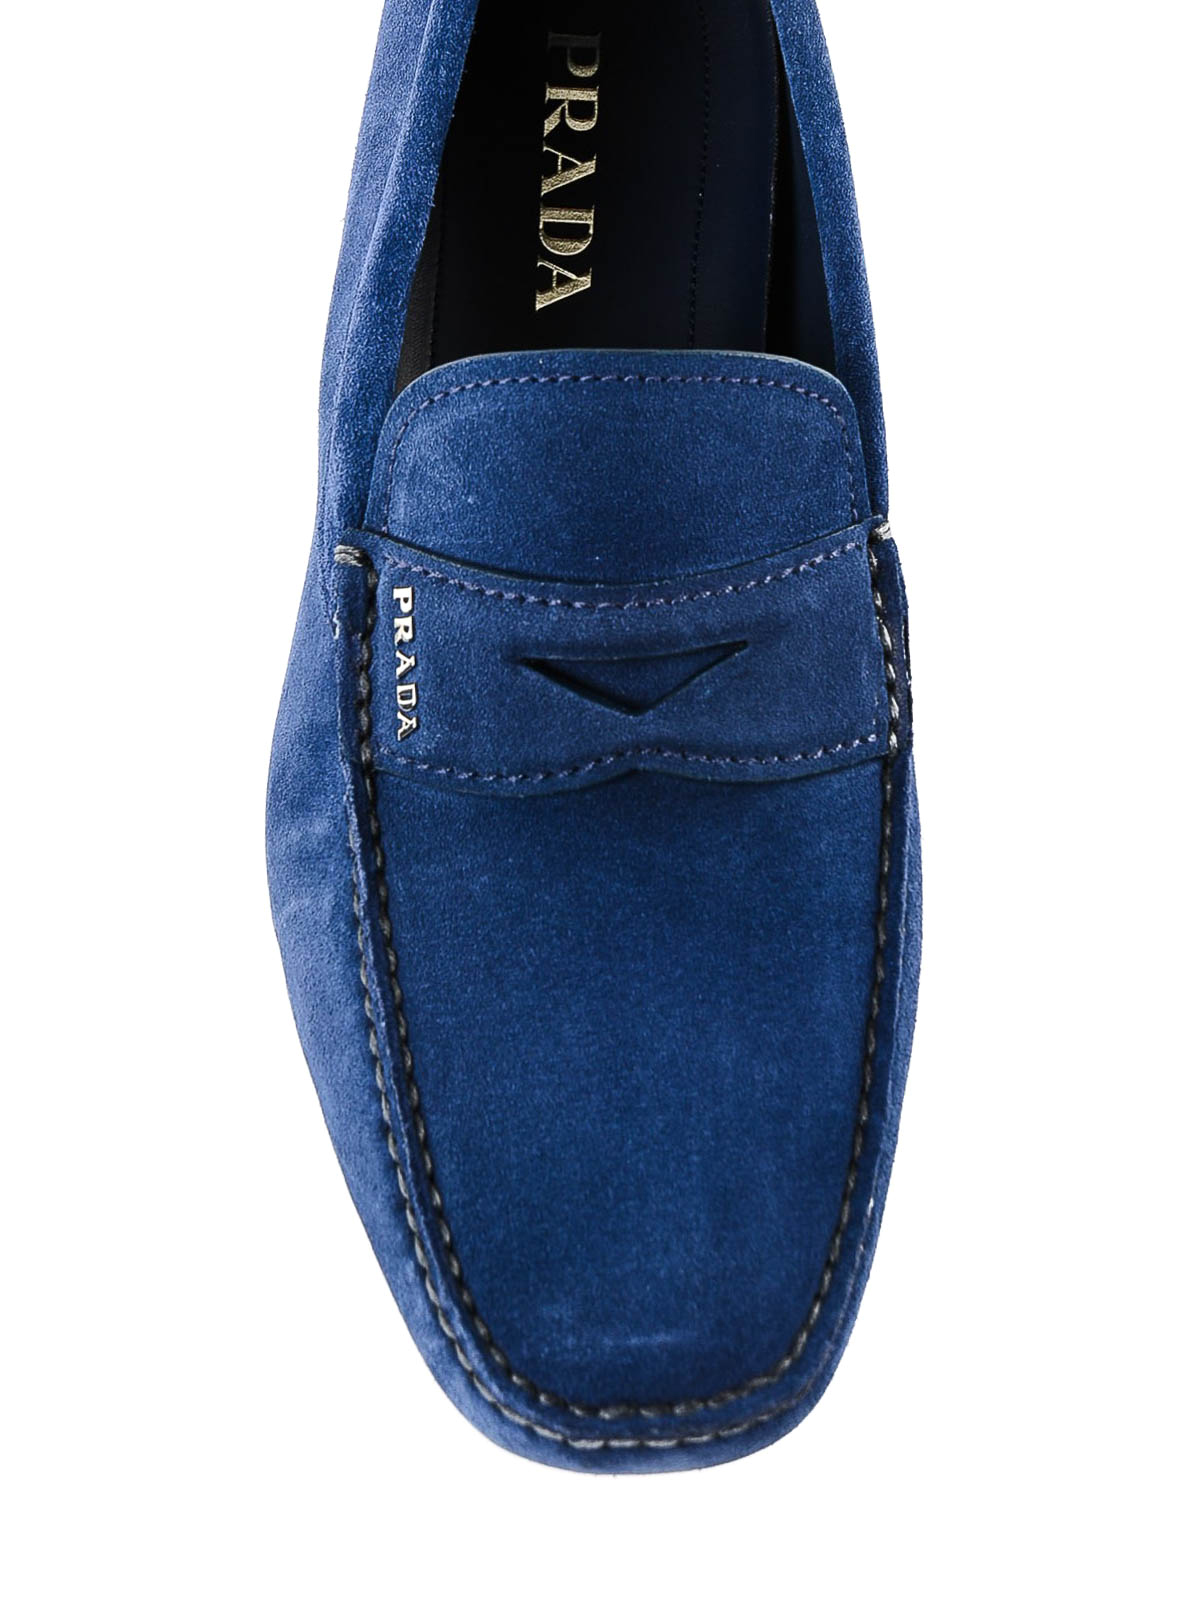 Prada - Blue suede loafers - Loafers 